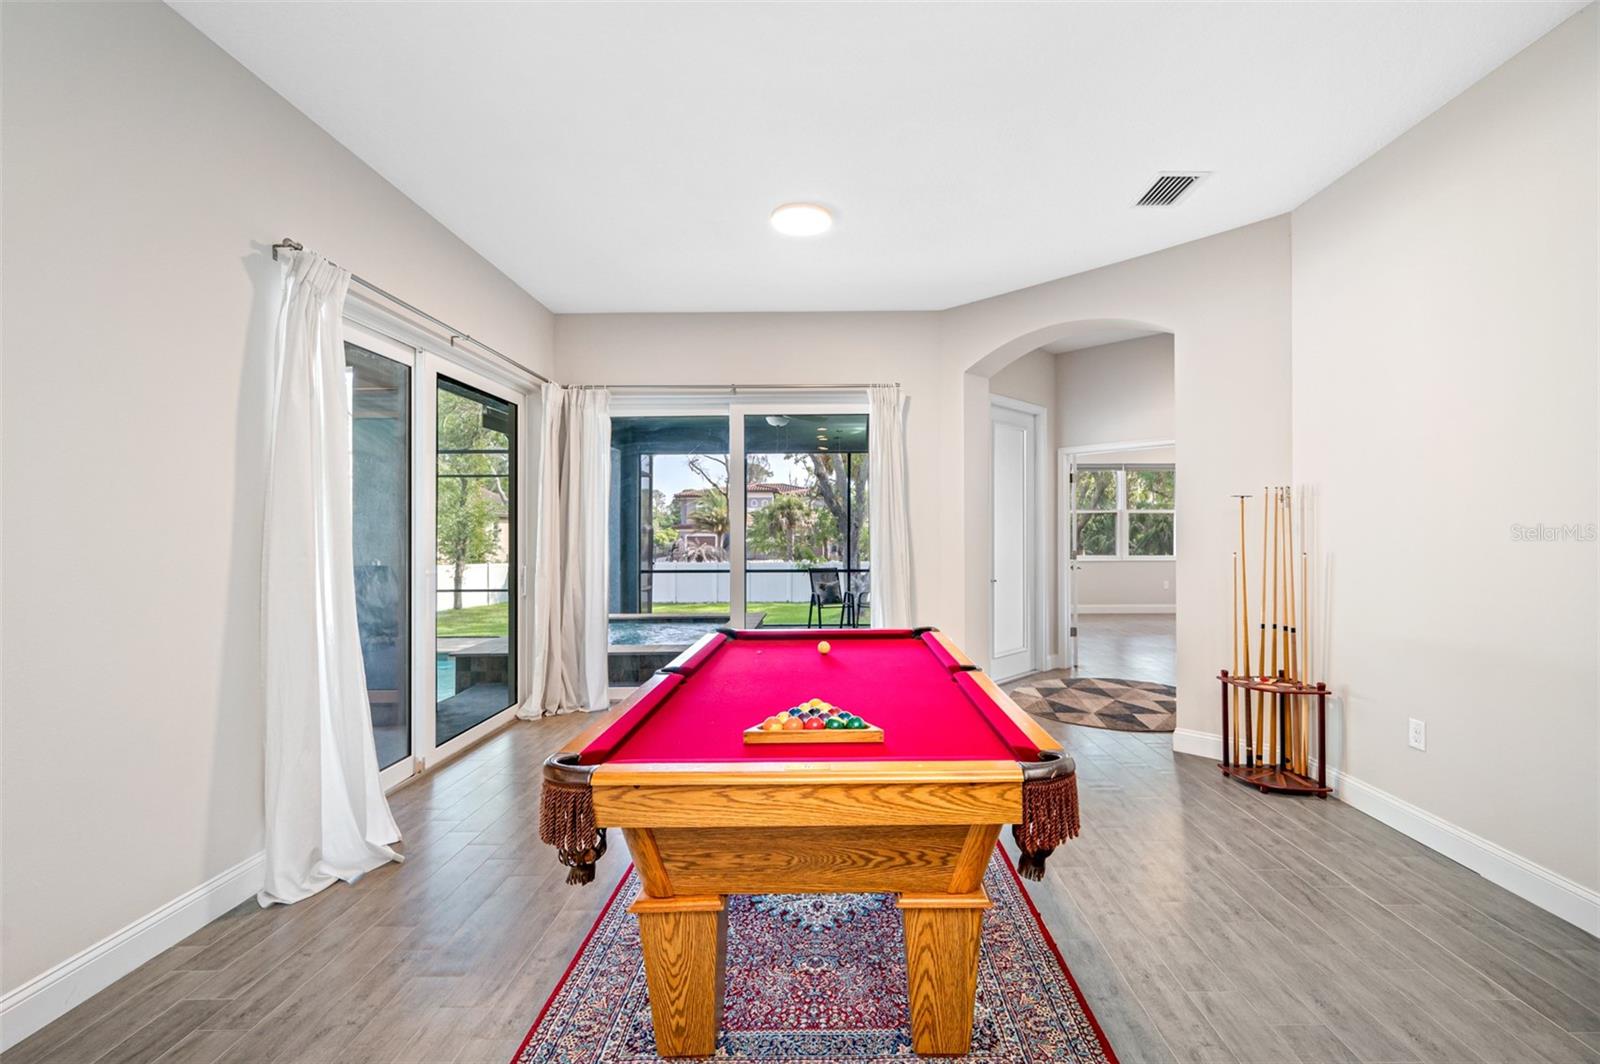 Dining area, currently used for pool table